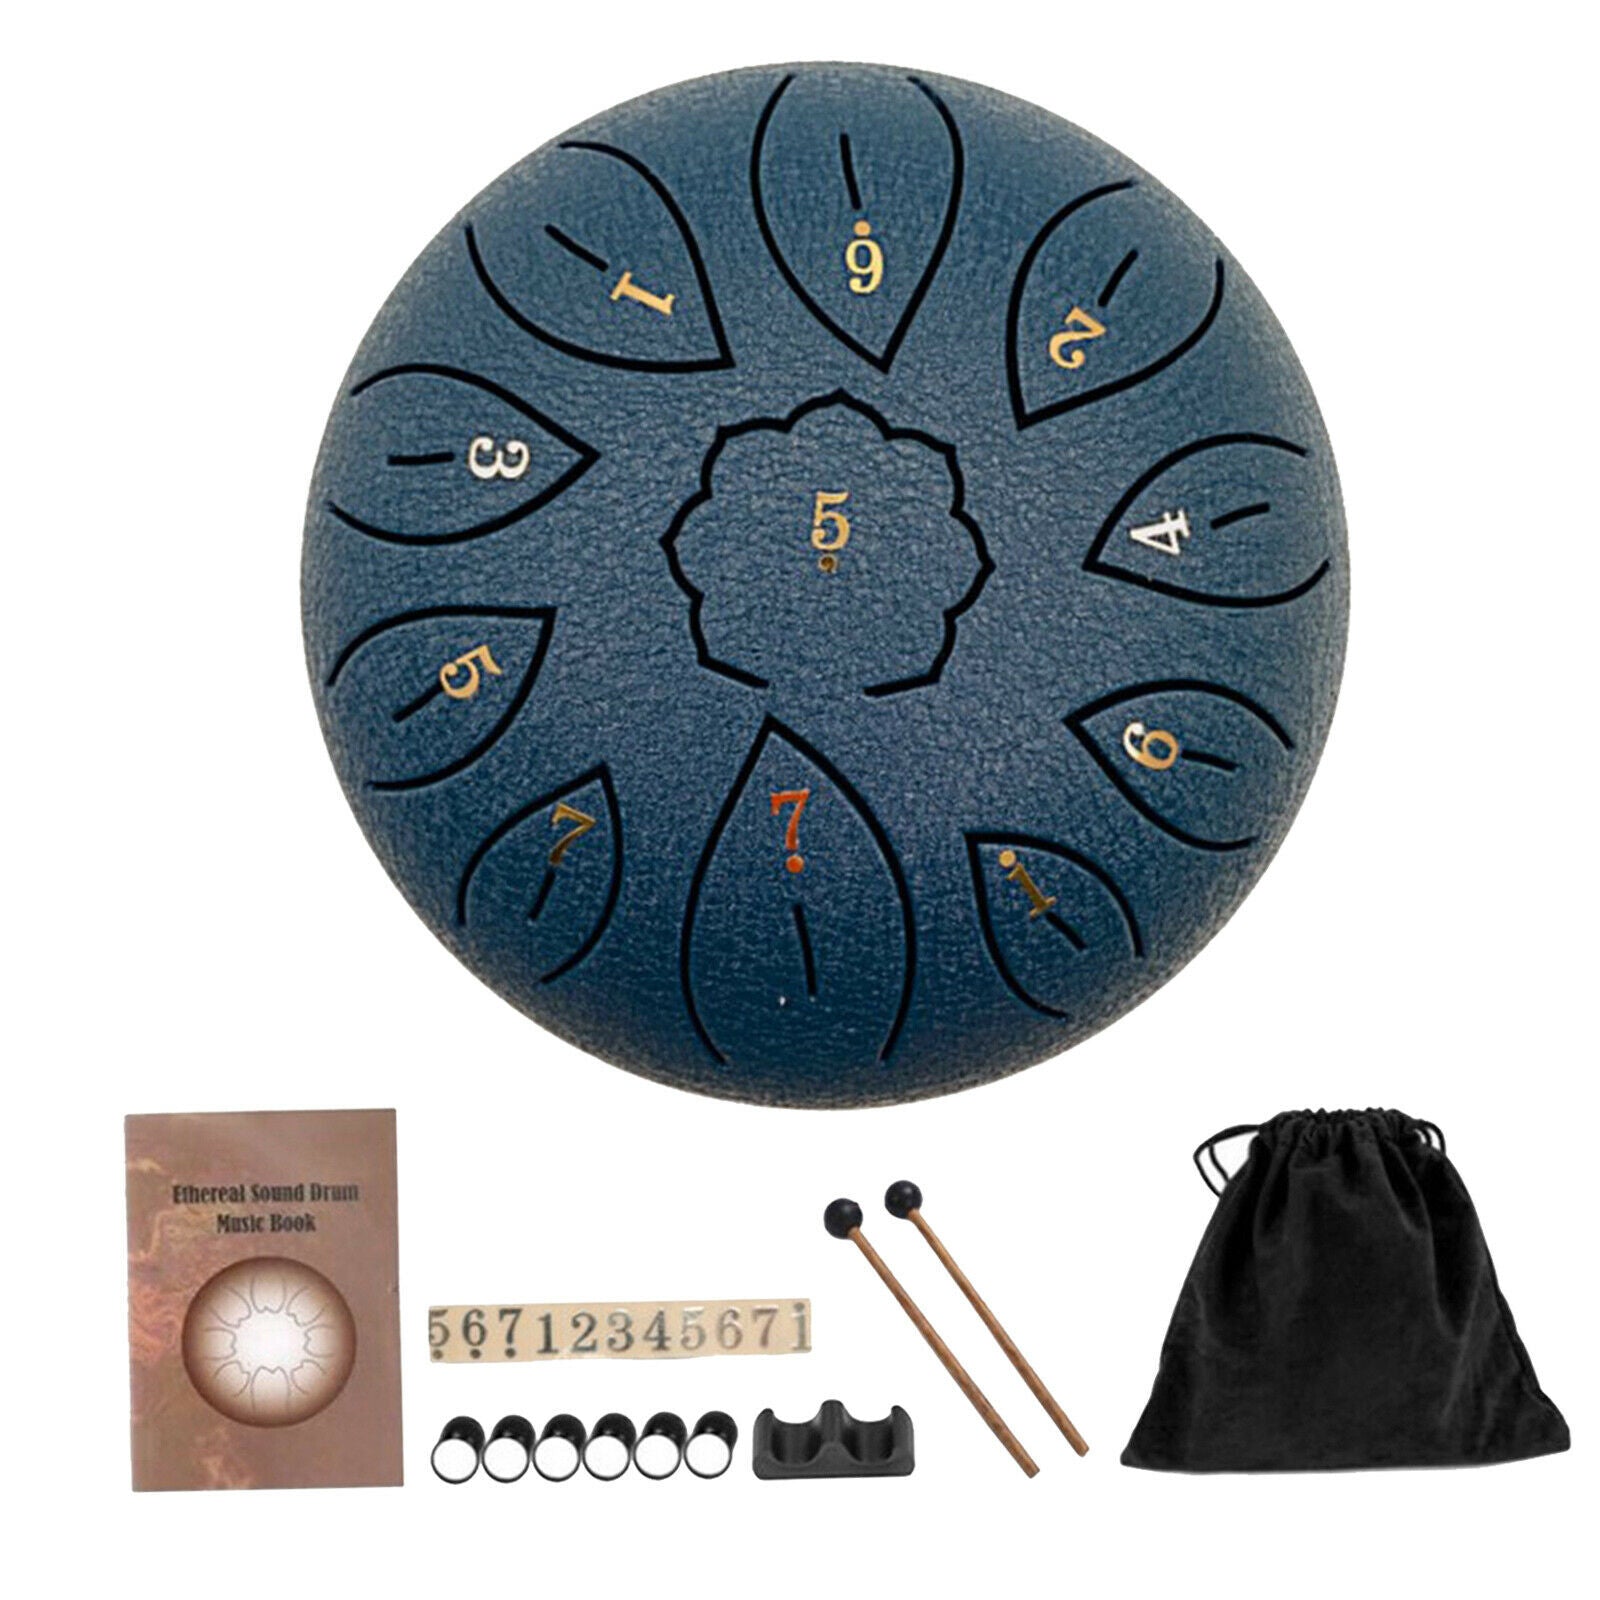 6 Inch Steel Tongue Drum & Storage Bag Music Book Gift for Boys Girls navy